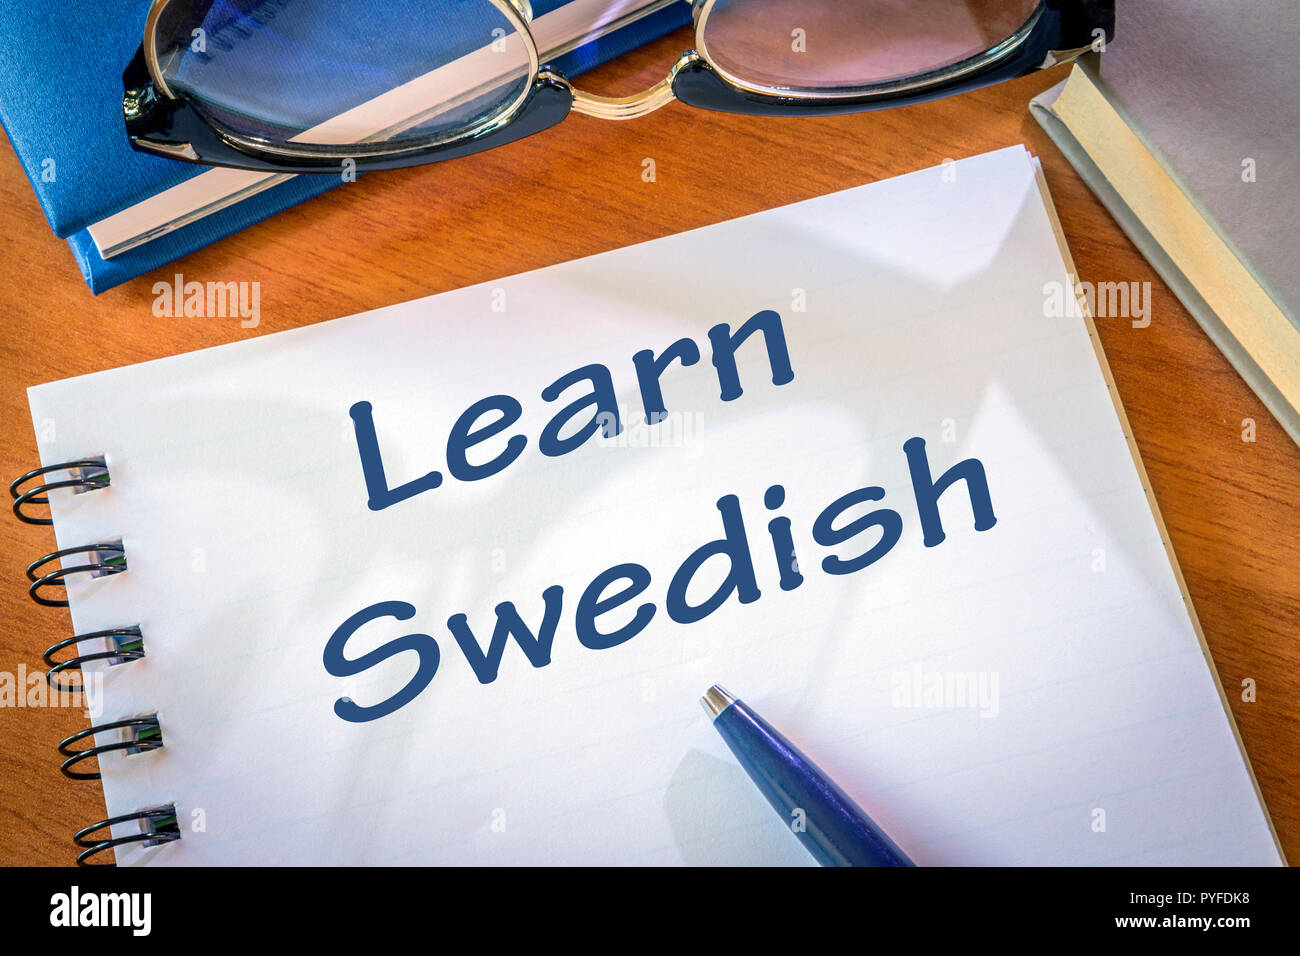 Learn Swedish written in a notepad. Education concept Stock Photo